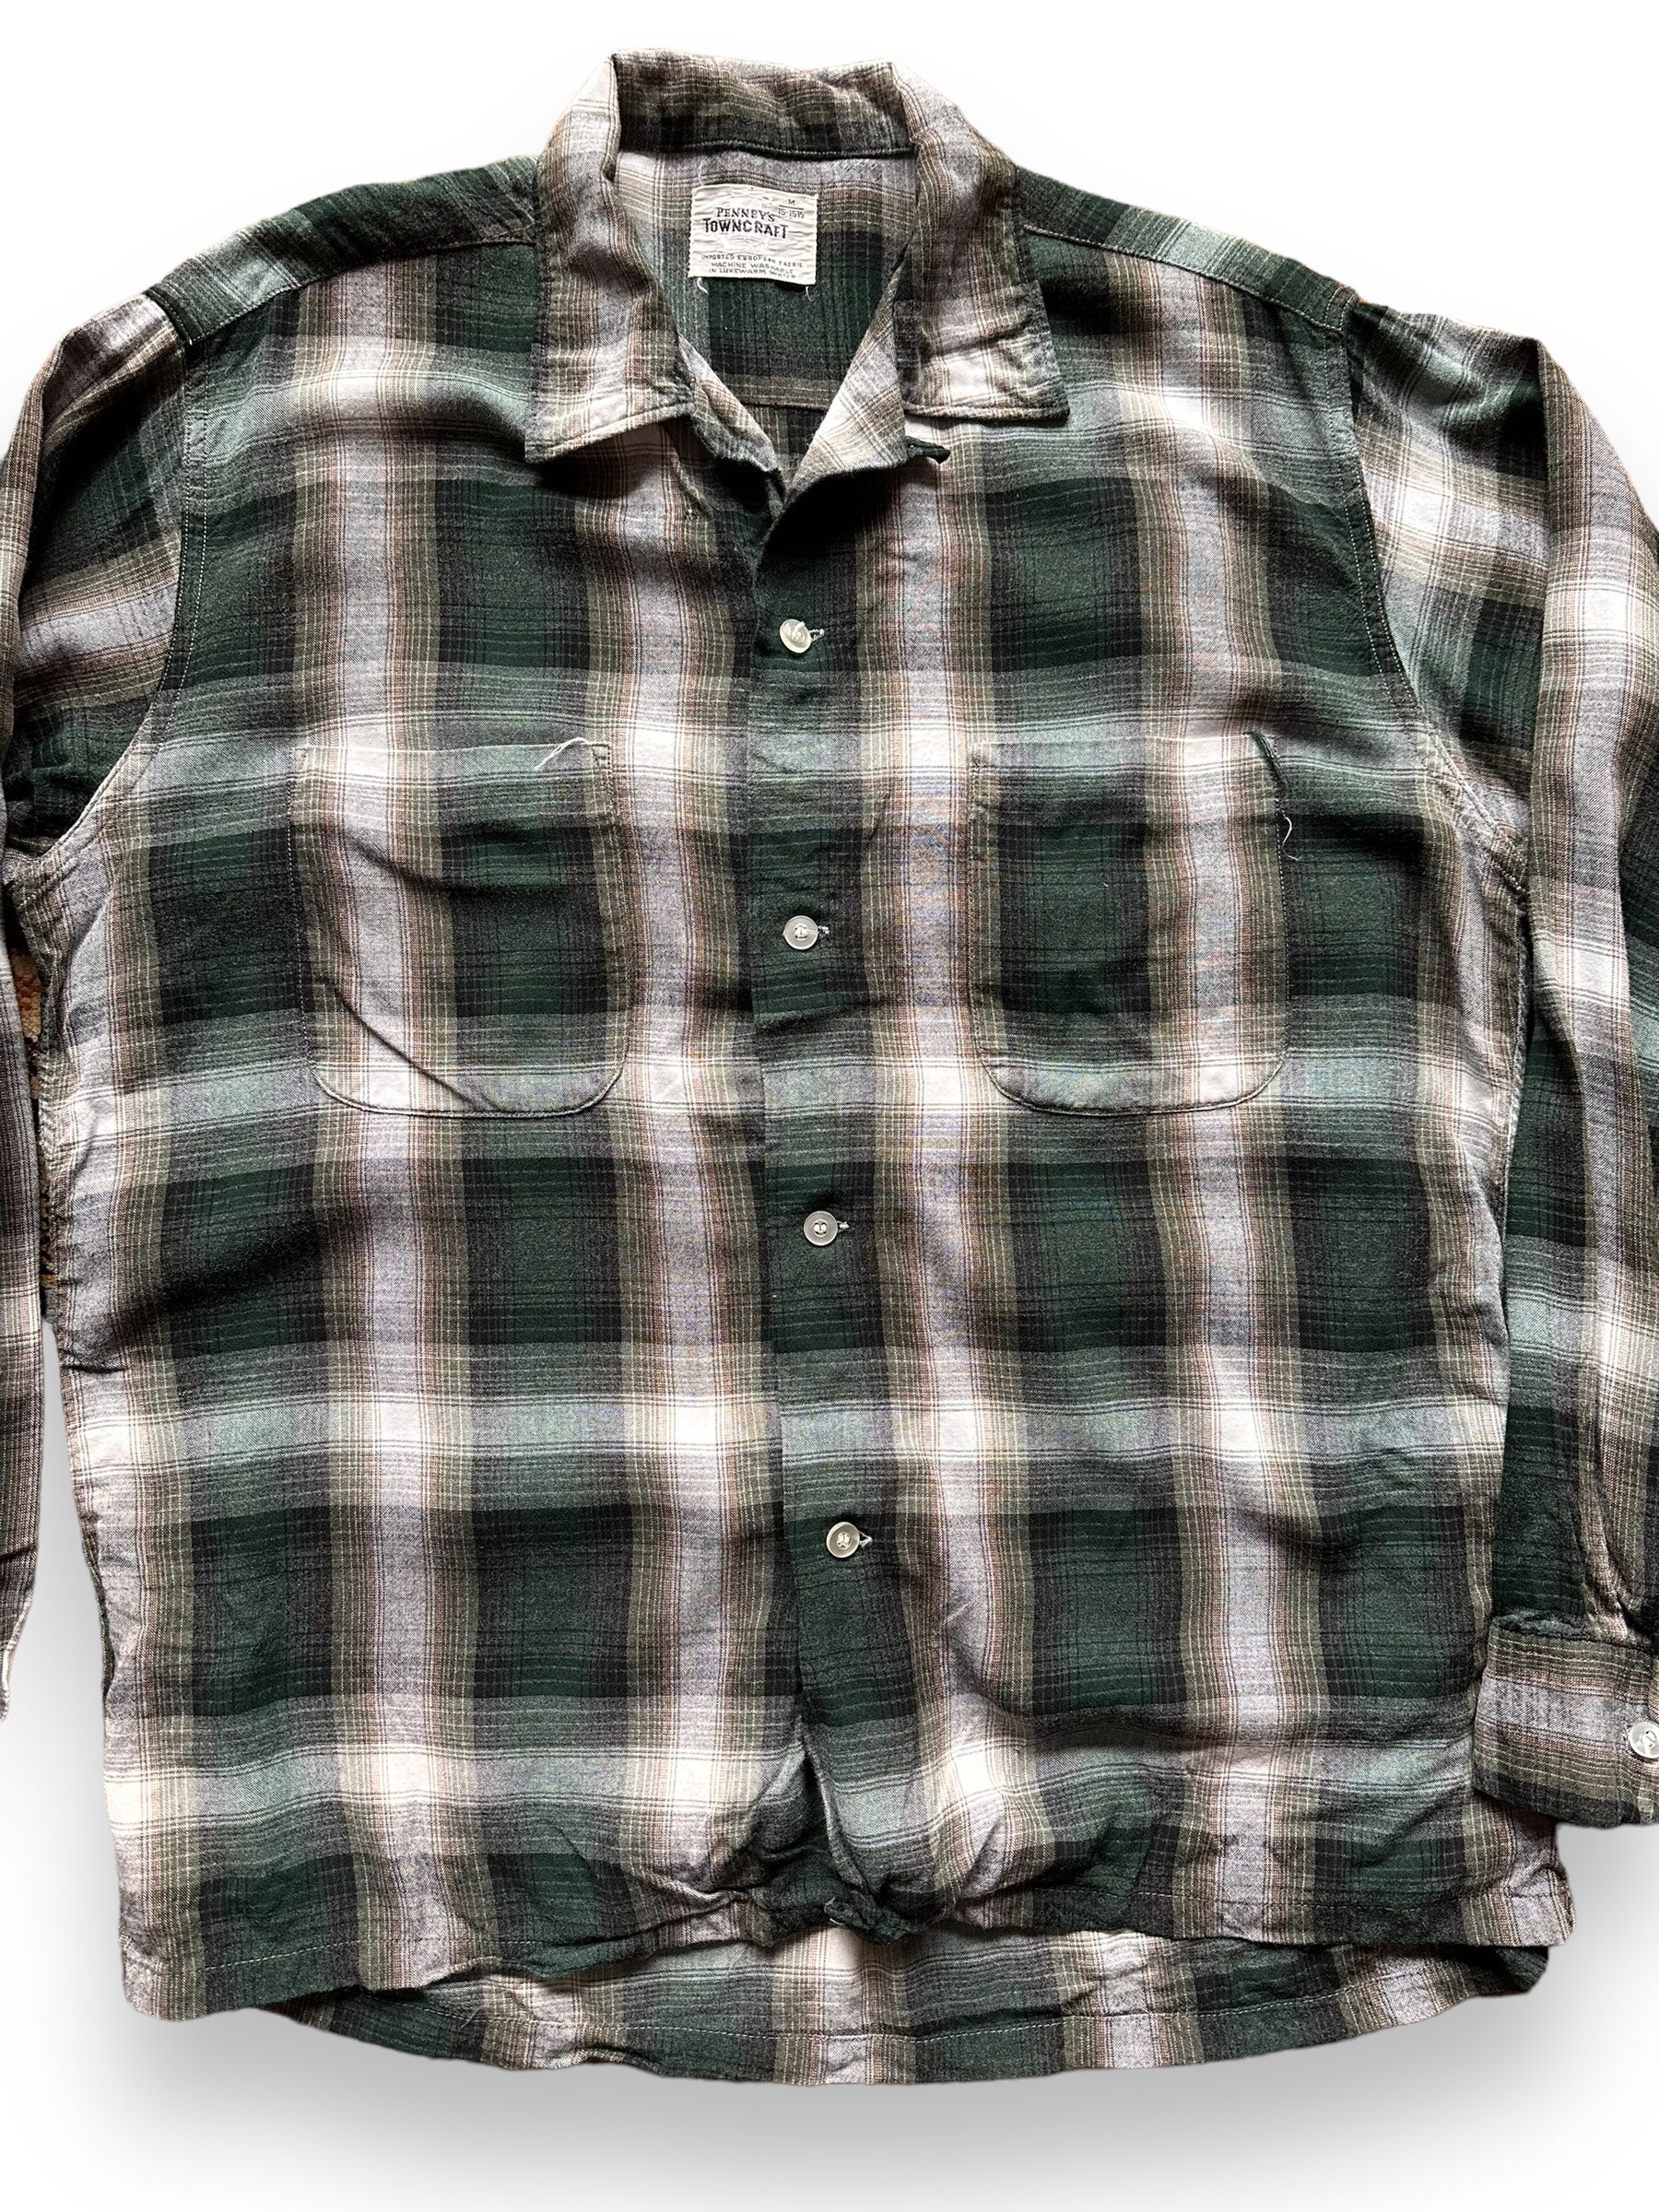 Front Detail on Vintage Penney's Towncraft Shadow Plaid Shirt SZ M | Vintage Rockabilly Shirt Seattle | Barn Owl Vintage Seattle